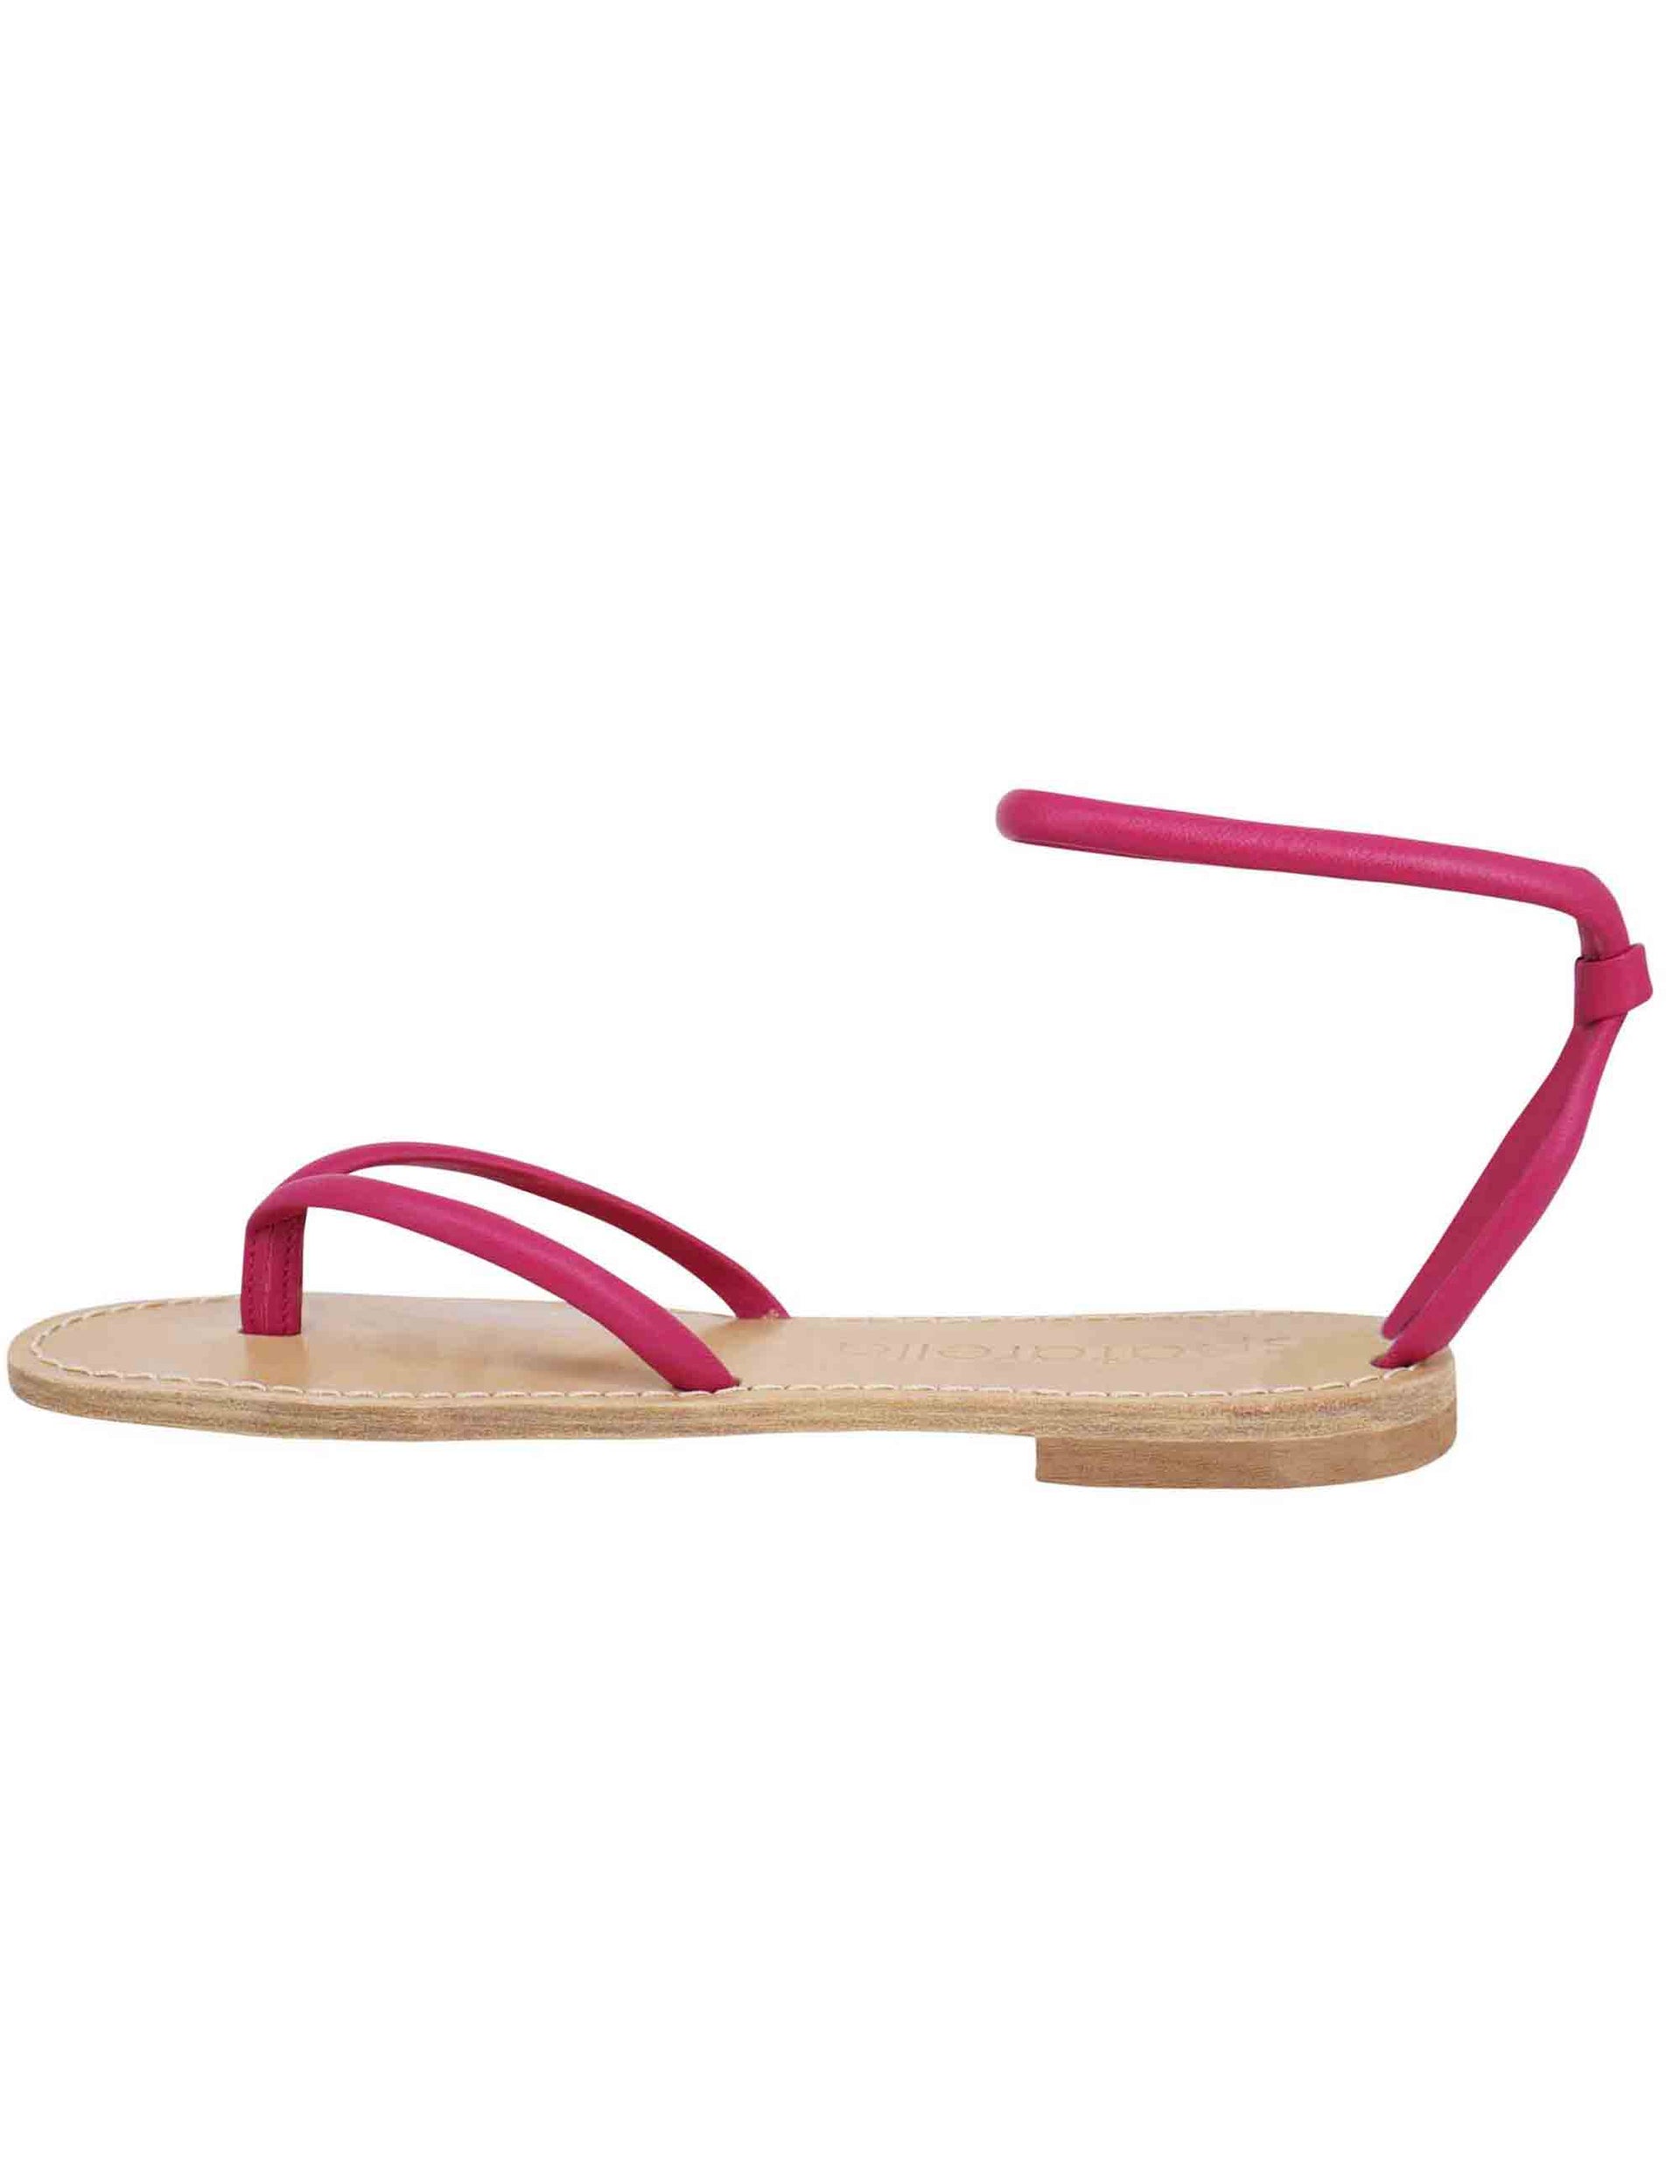 Women's flat flip-flop sandals in fuchsia leather with anklet